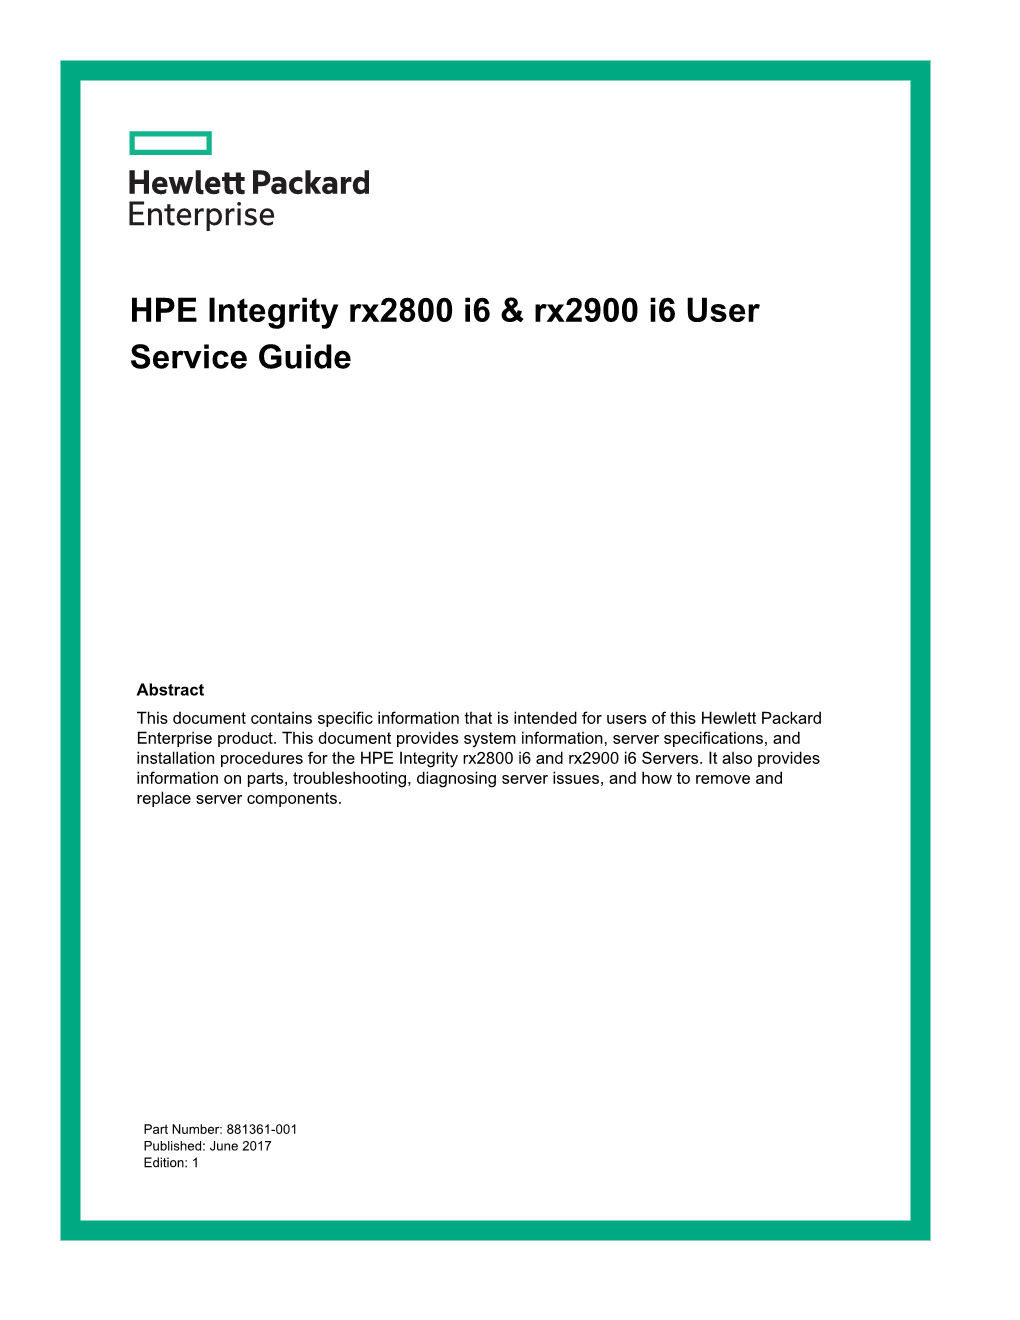 HPE Integrity Rx2800 I6 & Rx2900 I6 User Service Guide